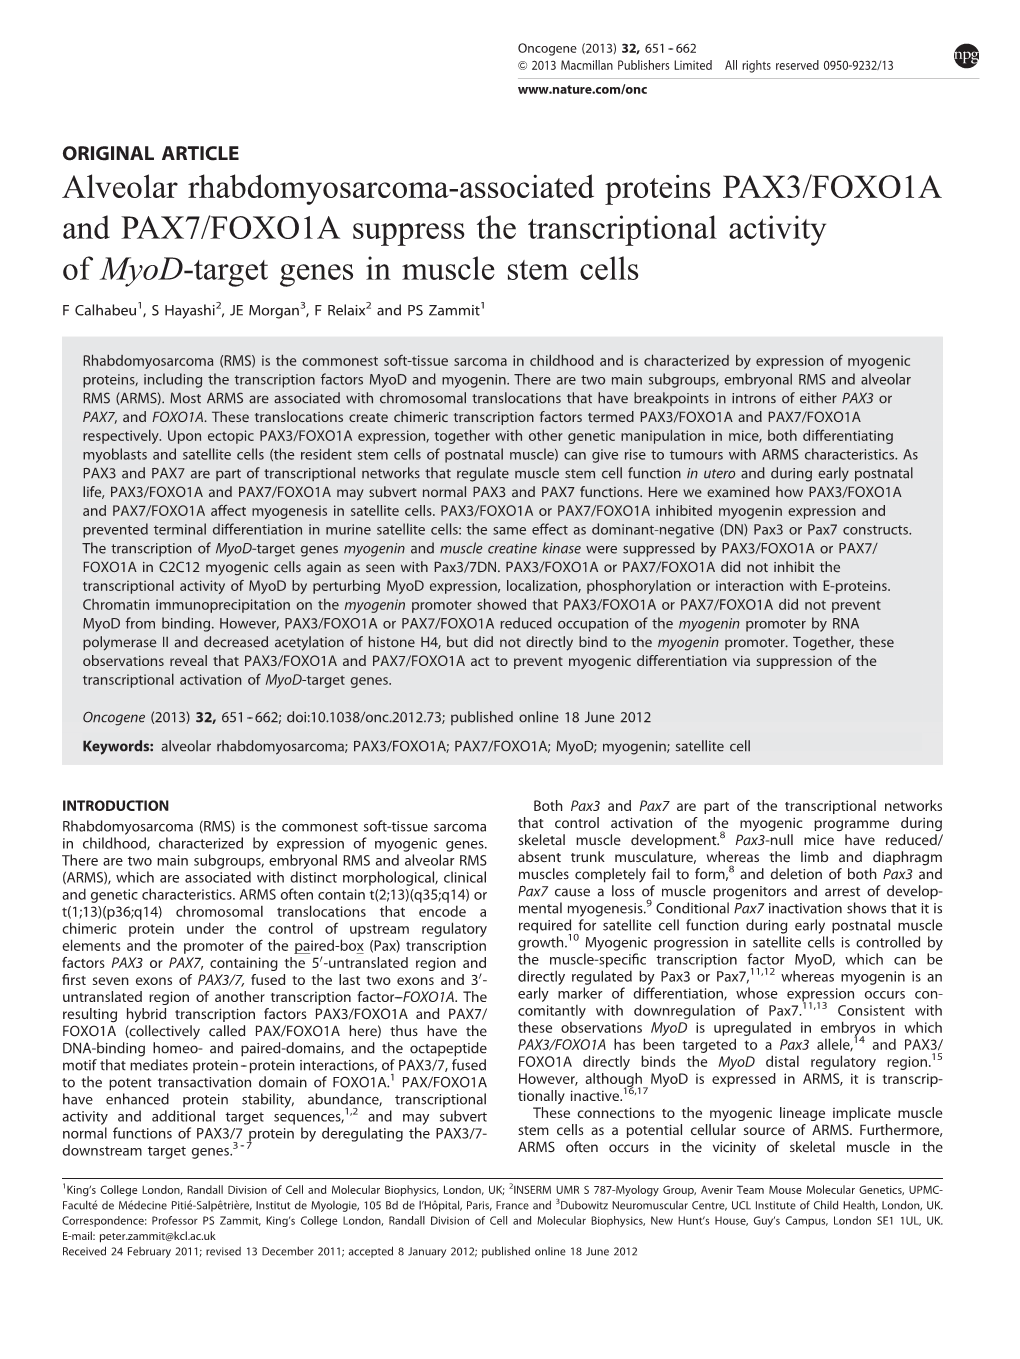 Alveolar Rhabdomyosarcoma-Associated Proteins PAX3/FOXO1A and PAX7/FOXO1A Suppress the Transcriptional Activity of Myod-Target Genes in Muscle Stem Cells